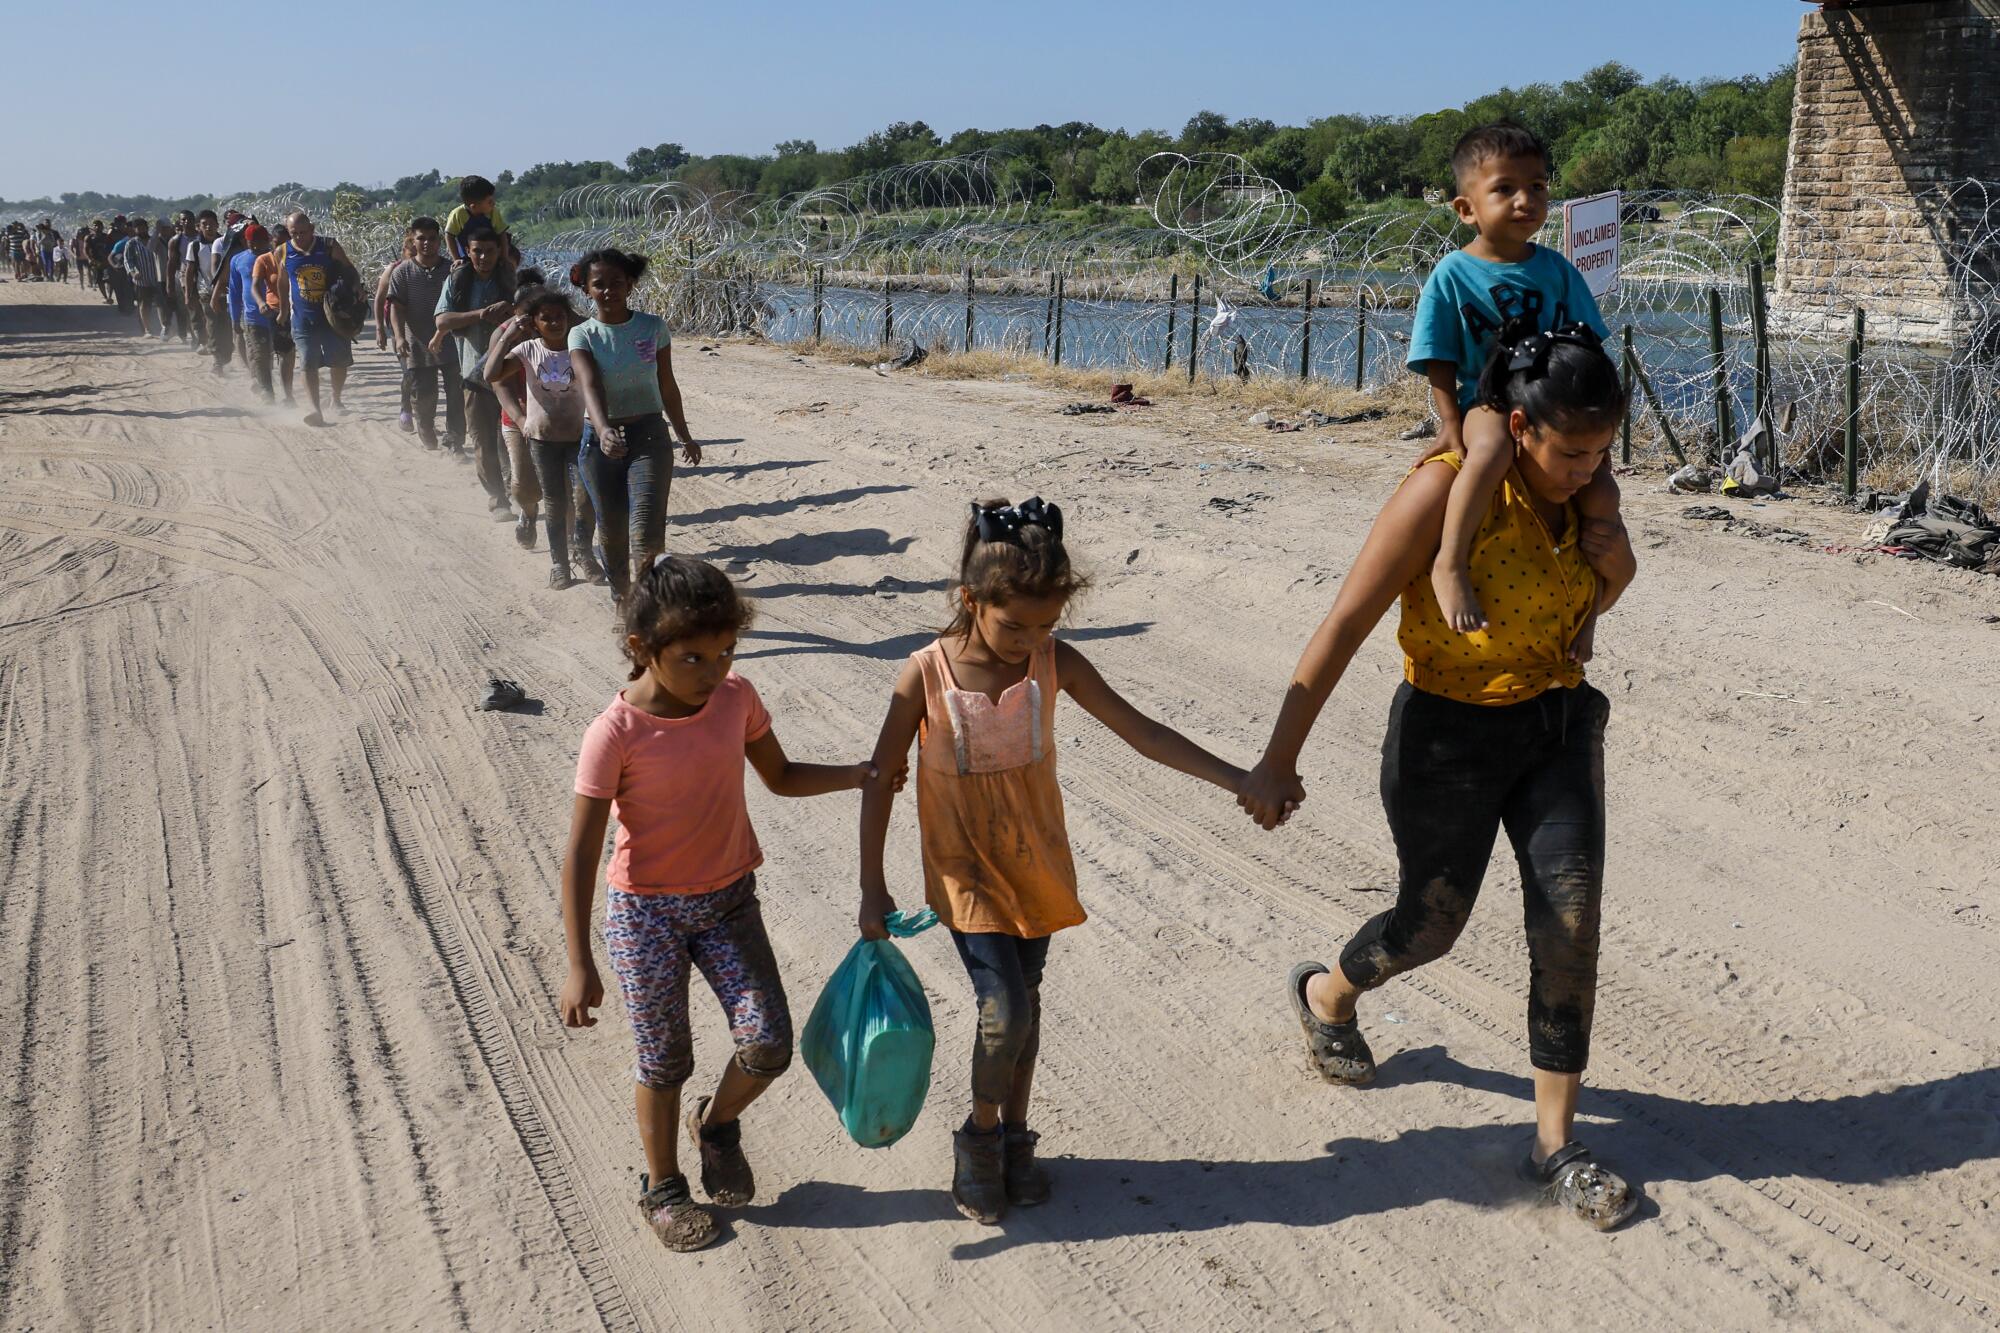 Hundreds of migrants walk to a U.S. Border Patrol staging area to be